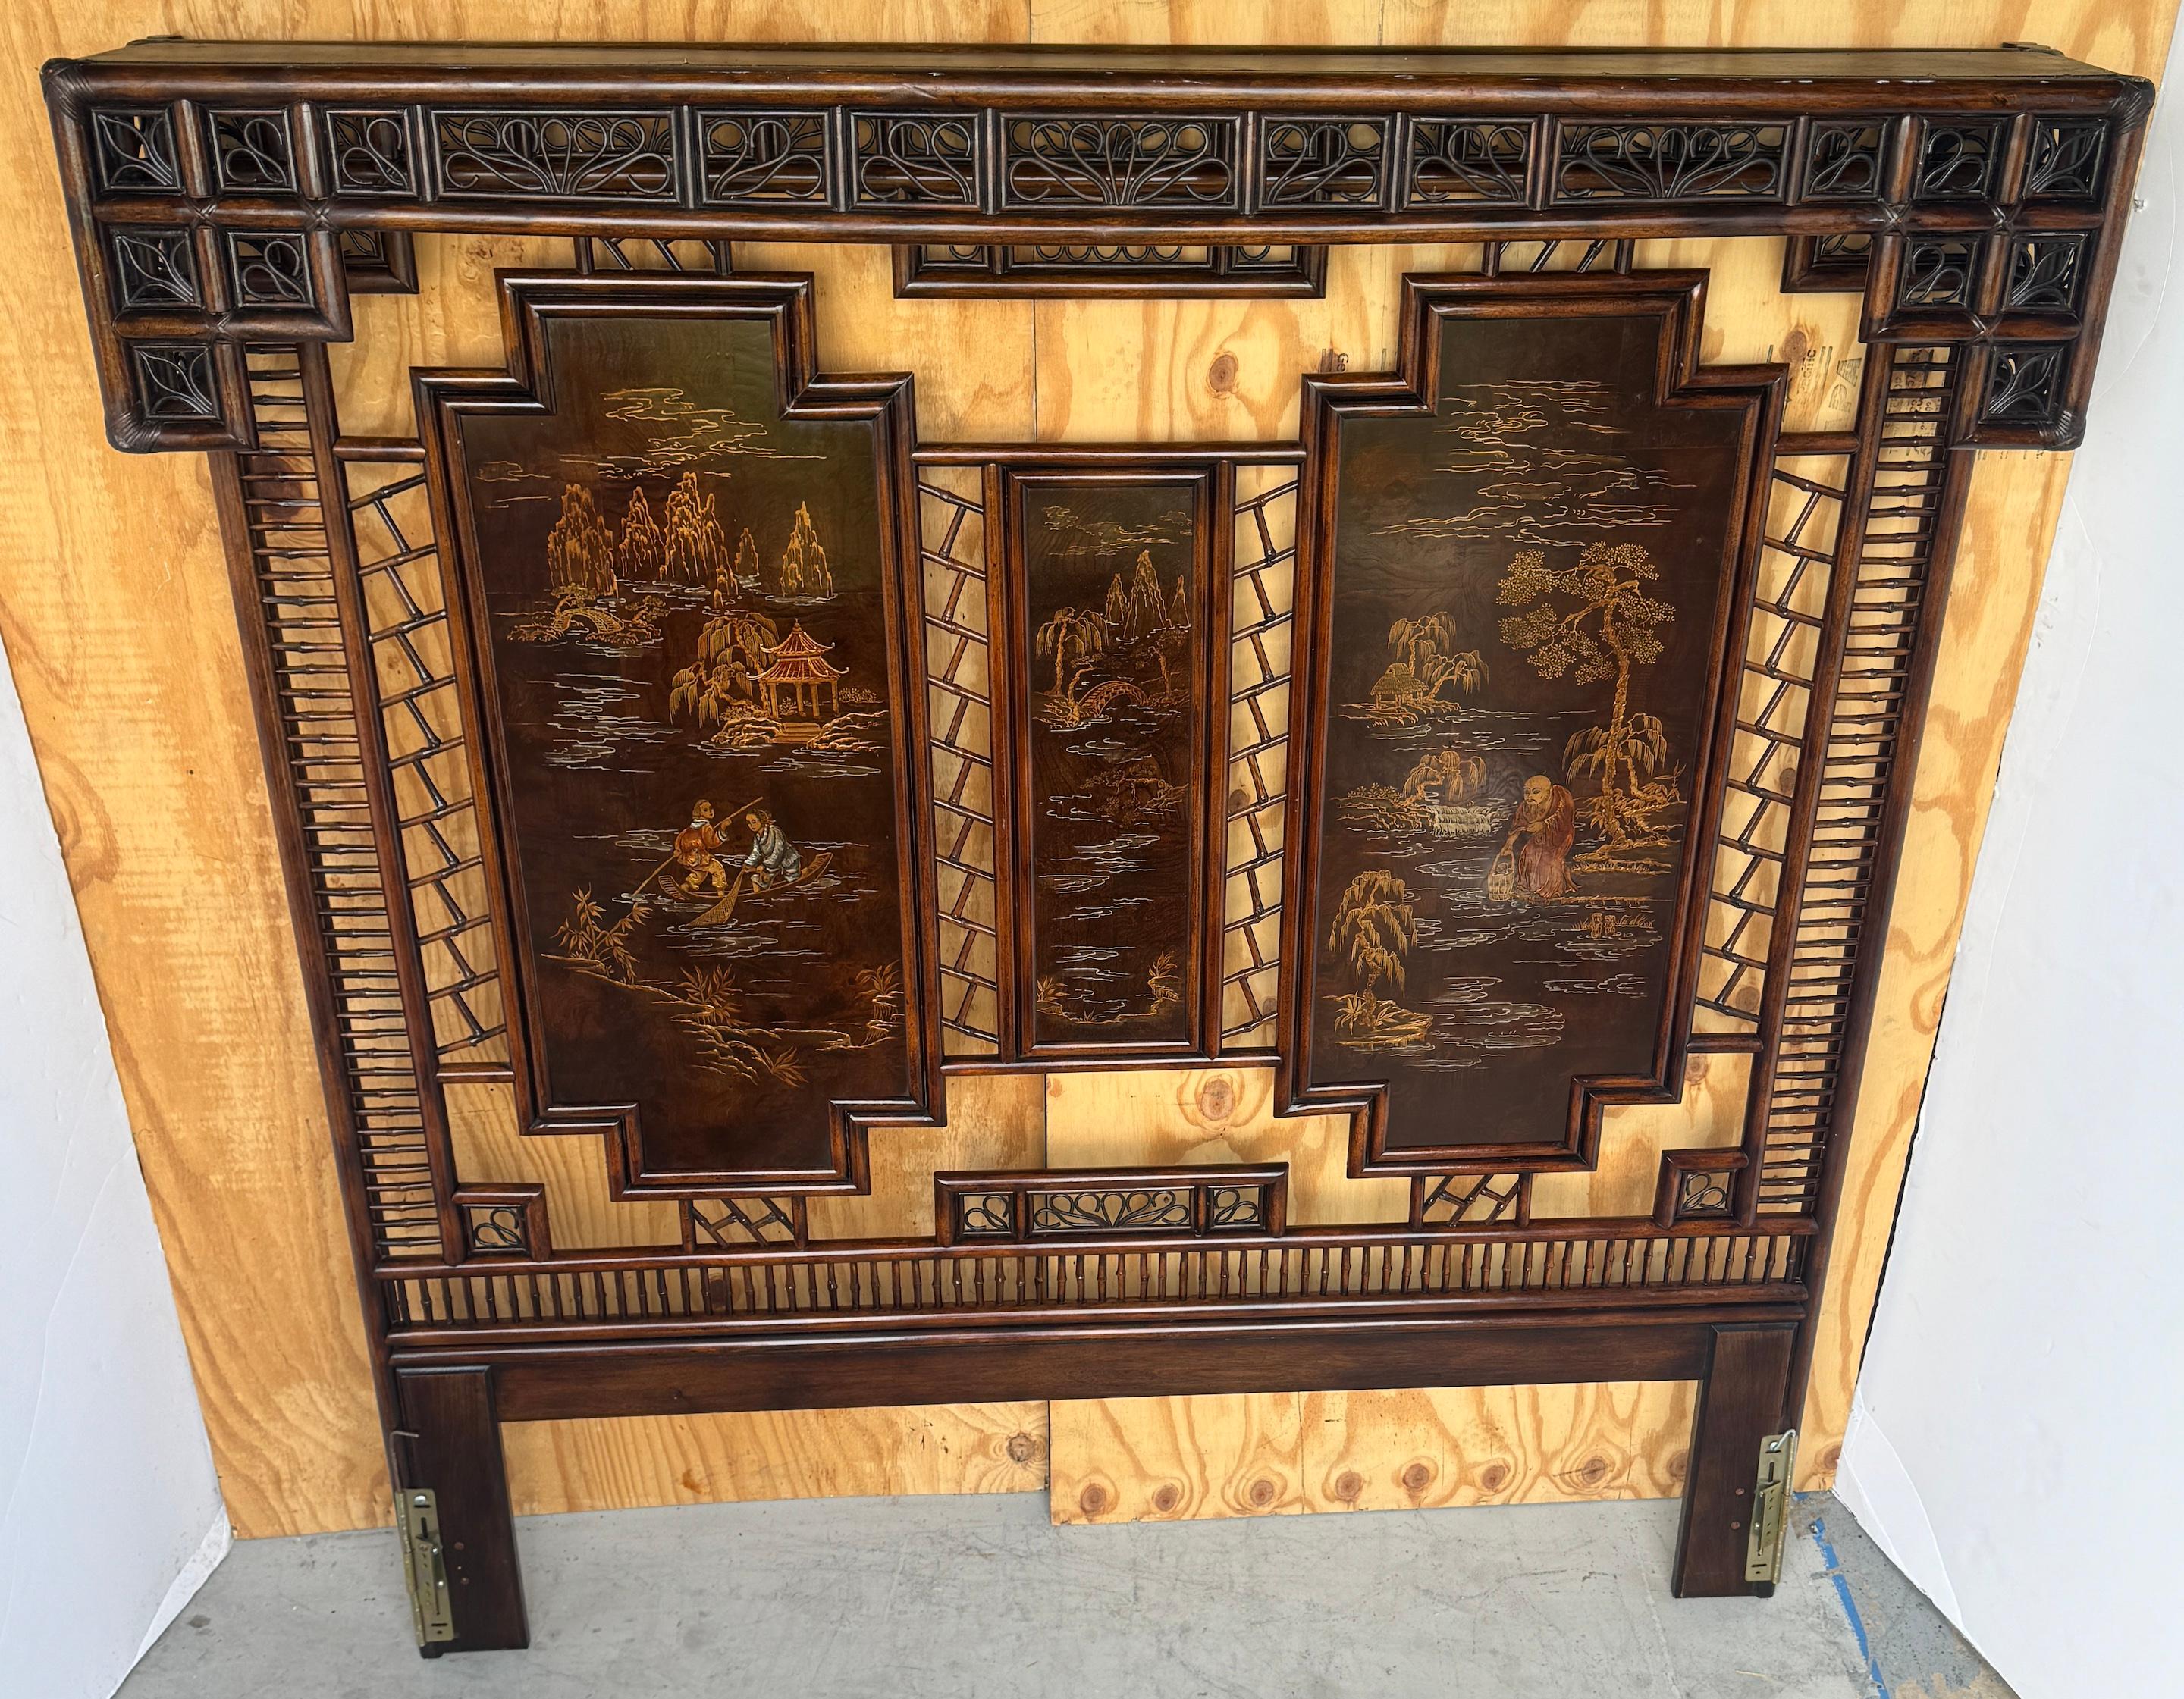 King Size Chinoiserie Rattan and Lacquered Canopy Headboard, by Henredon
USA, Circa Later 20th Century

A magnificent rare King-Size Chinoiserie Rattan and Lacquered Canopy Headboard was made by Henredon in the late 20th century in the USA. This